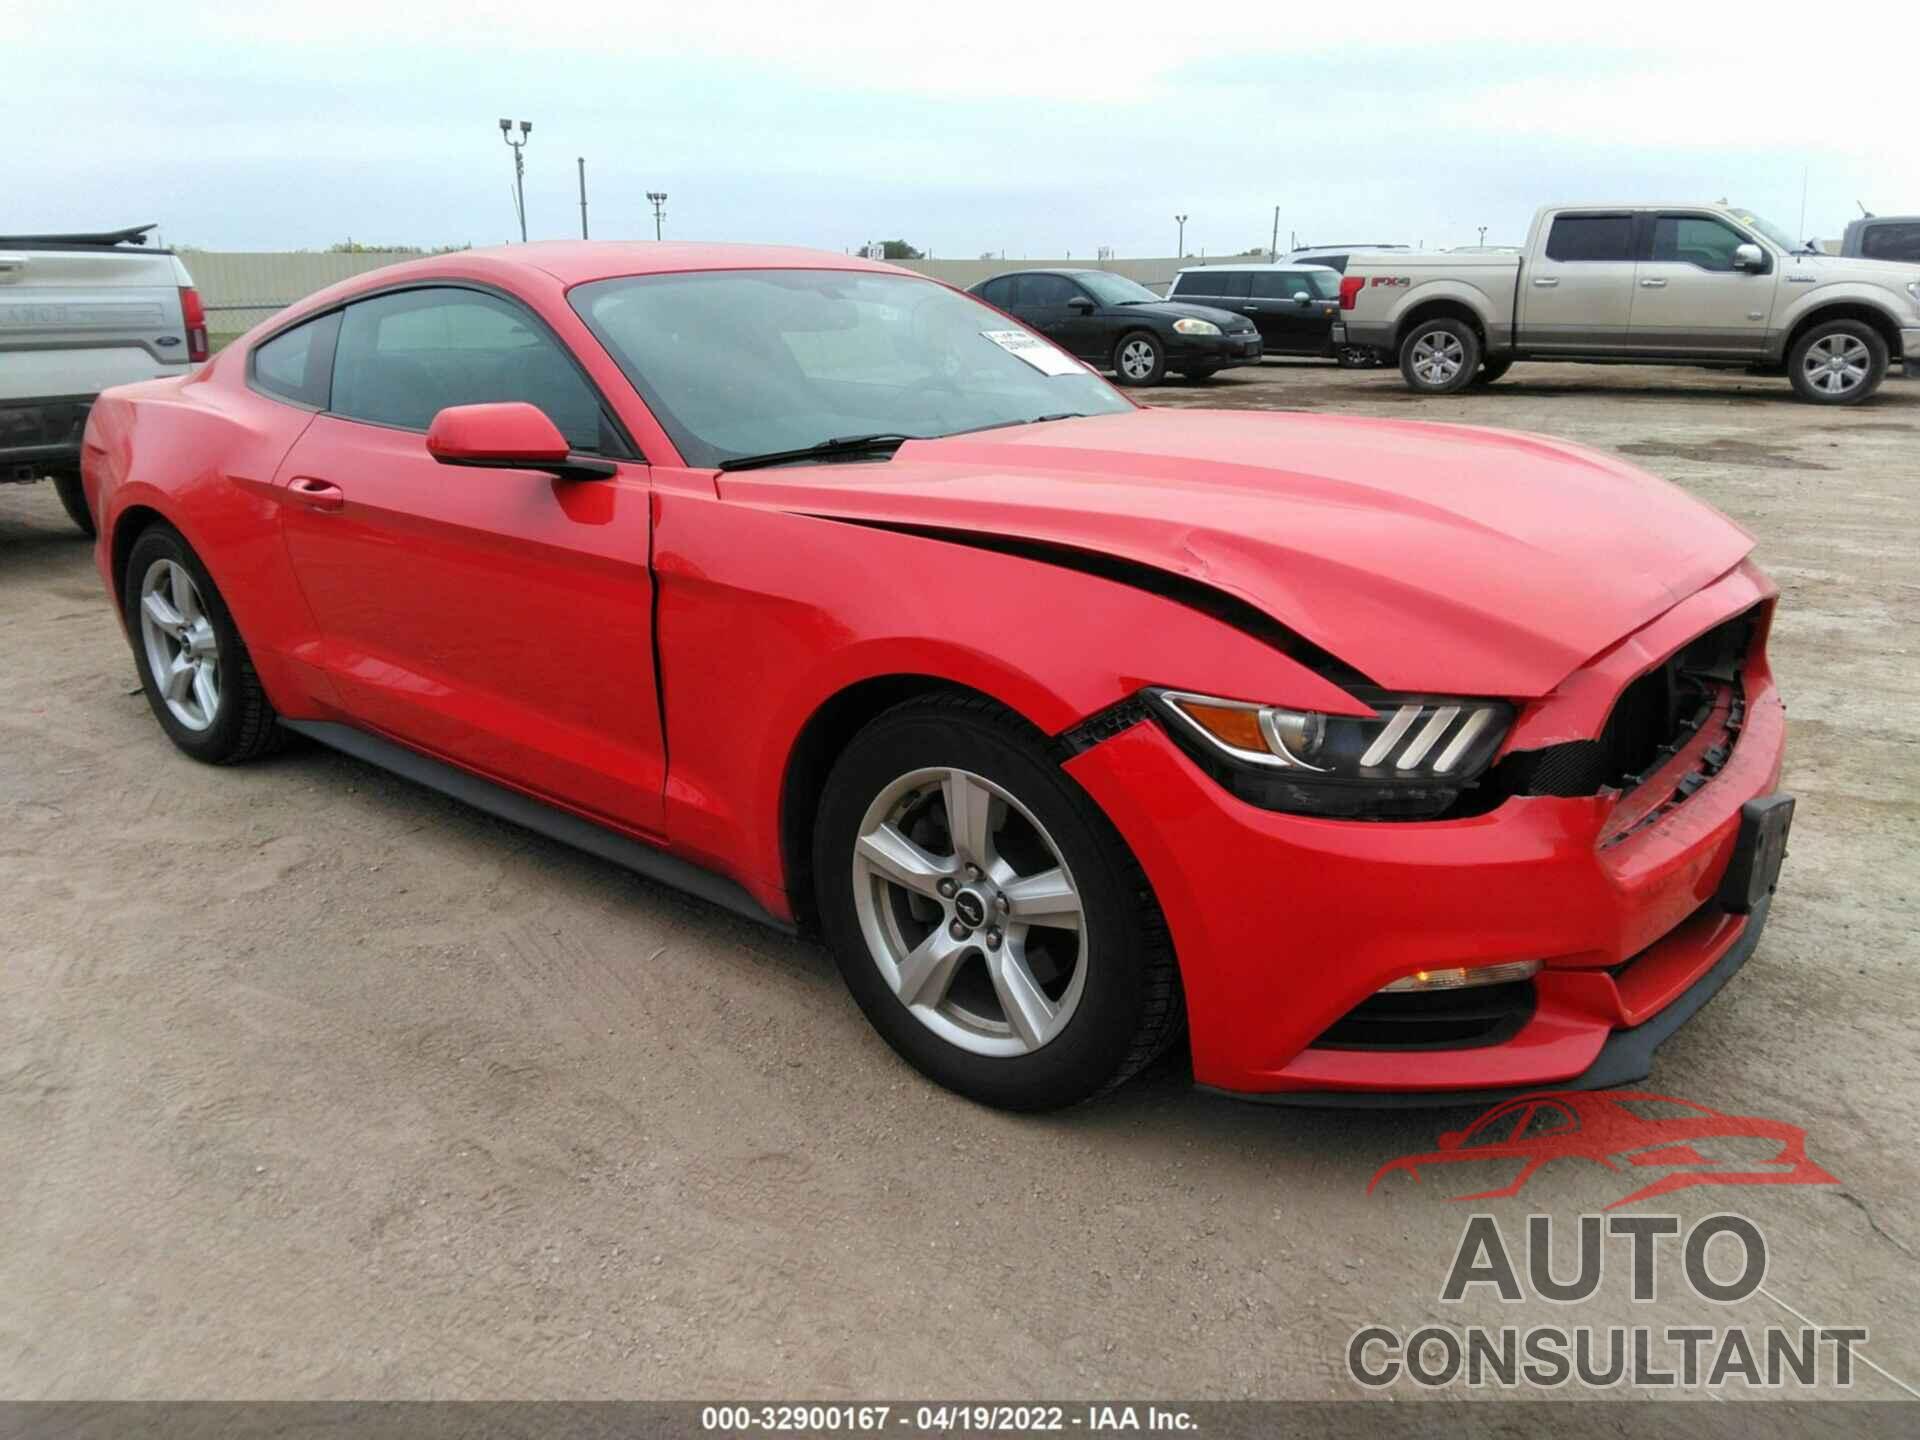 FORD MUSTANG 2017 - 1FA6P8AM6H5306453